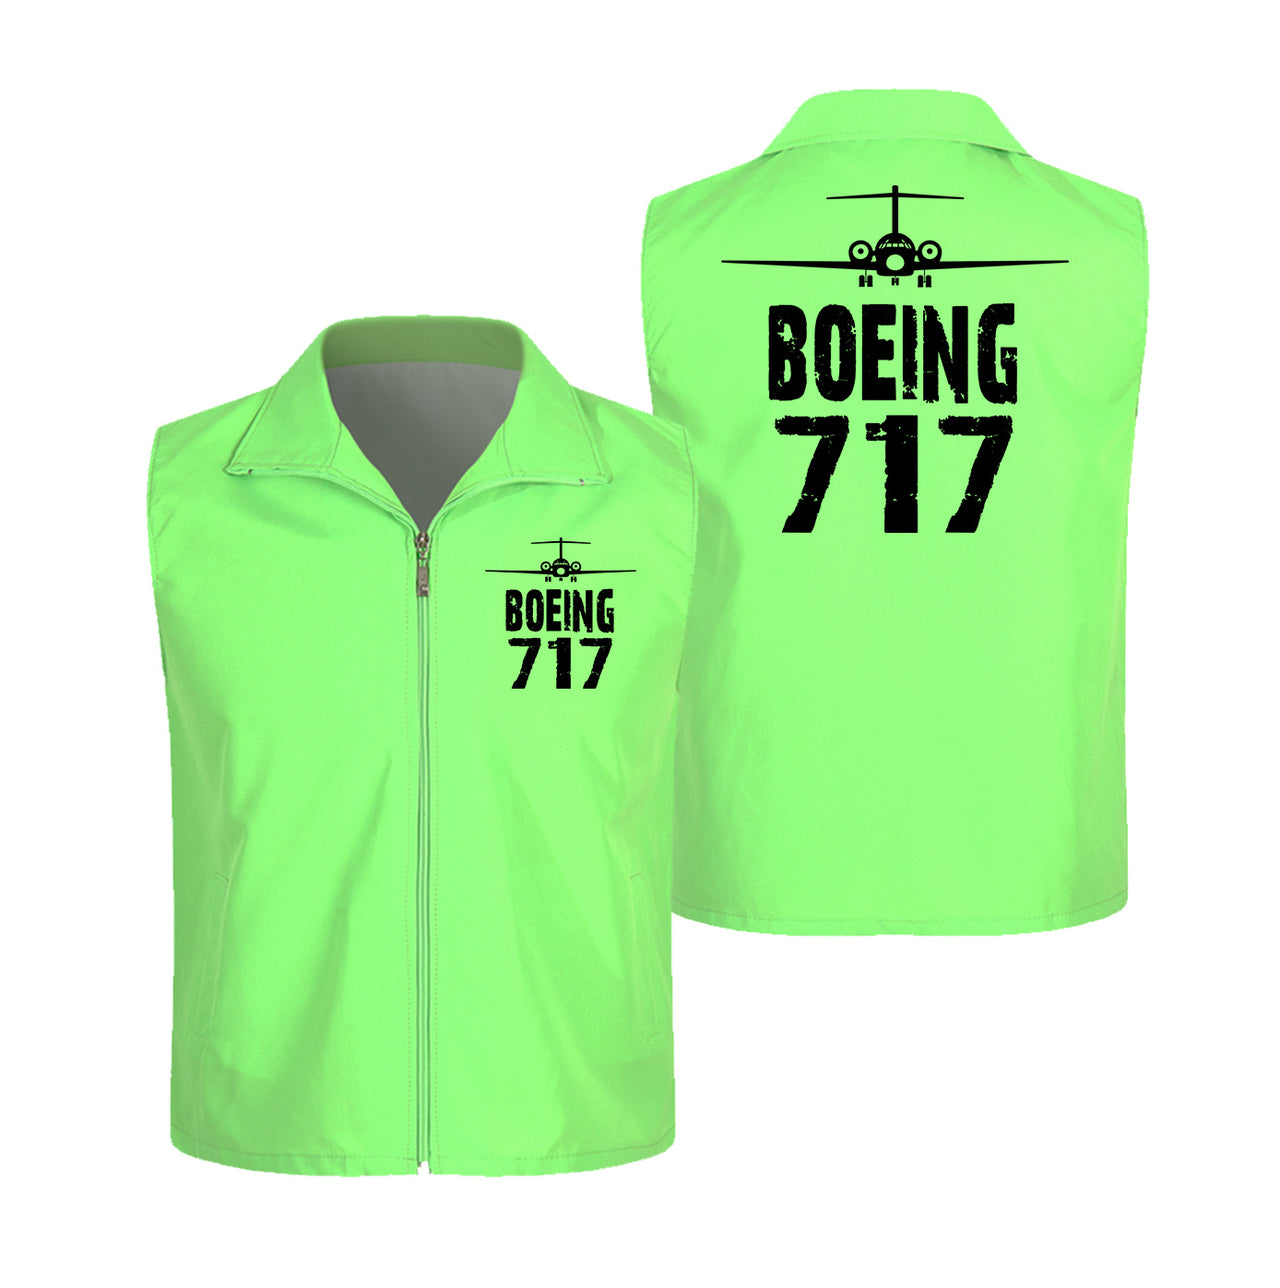 Boeing 717 & Plane Designed Thin Style Vests